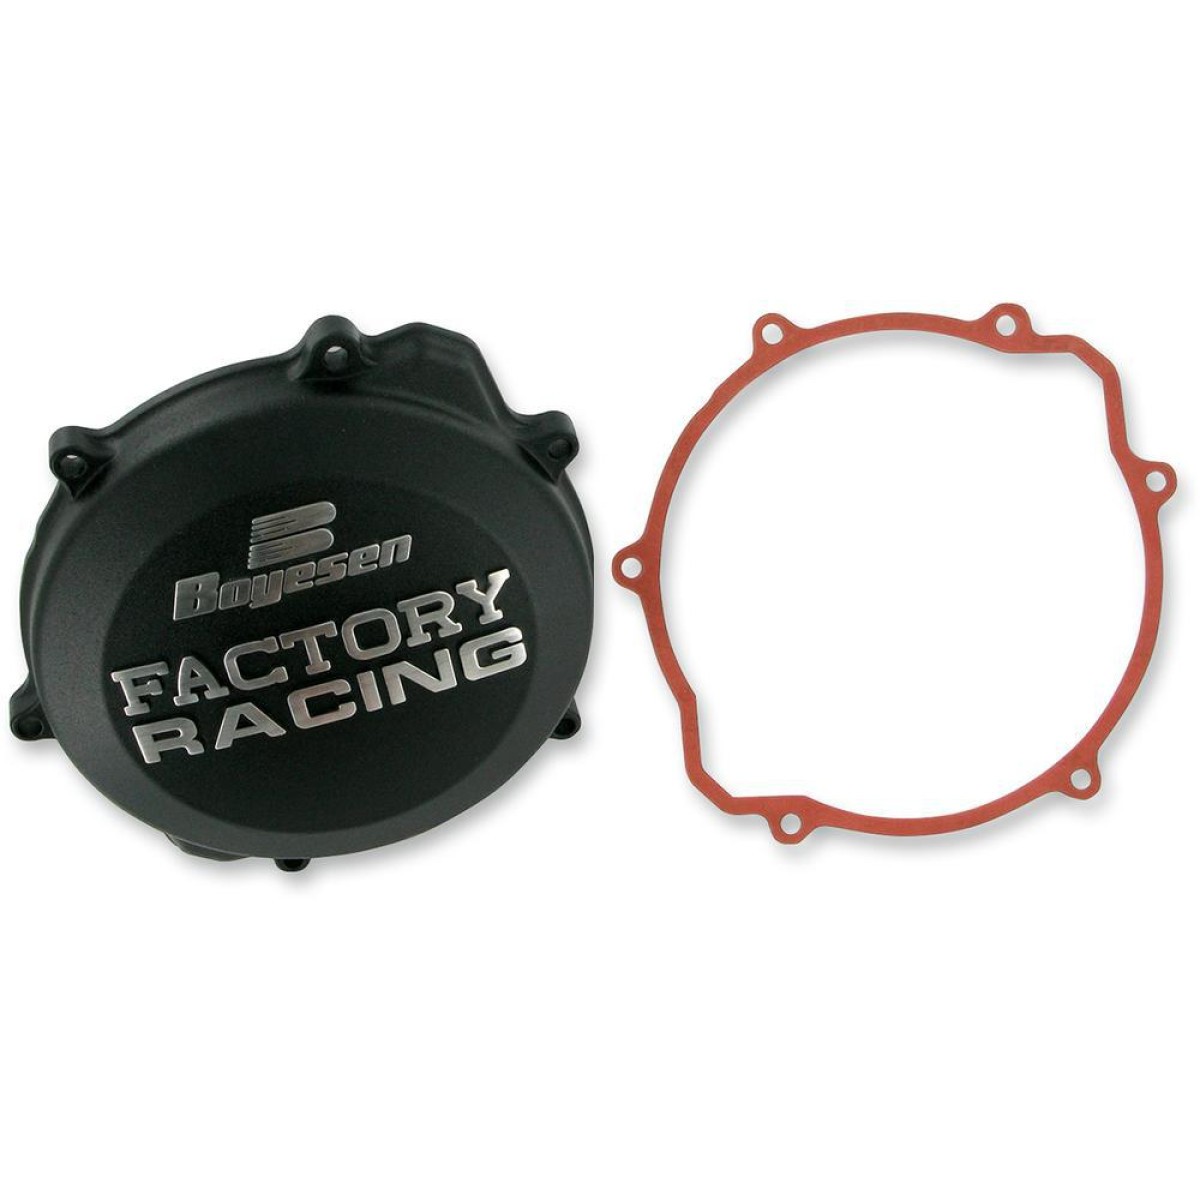 Details about   Yamaha YZ250 1986-1987 Clutch Cover Gasket